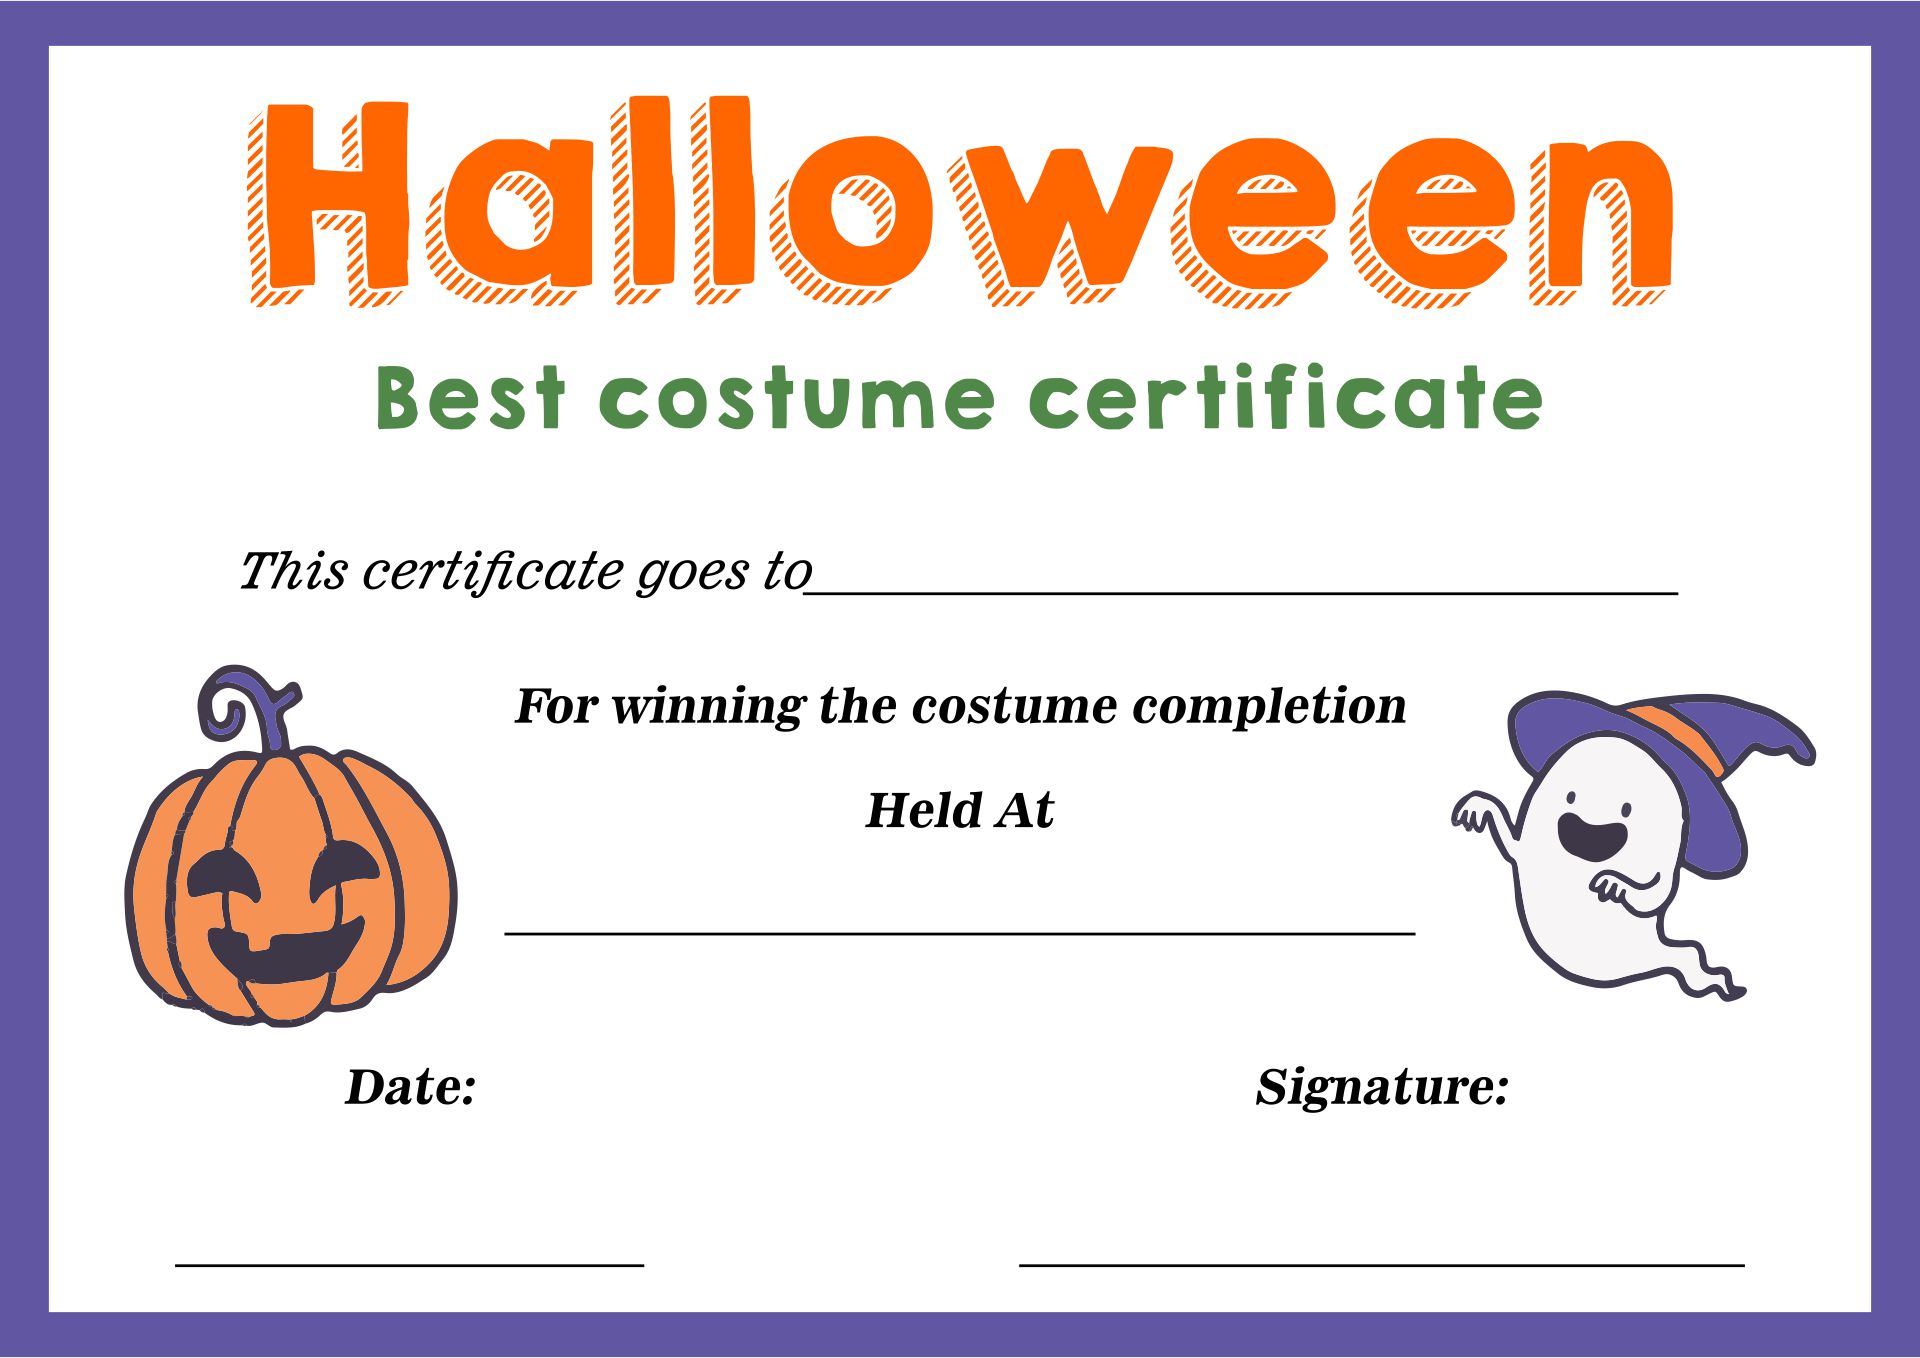 15 Best Halloween Costume Award Printable Certificates PDF for Free at